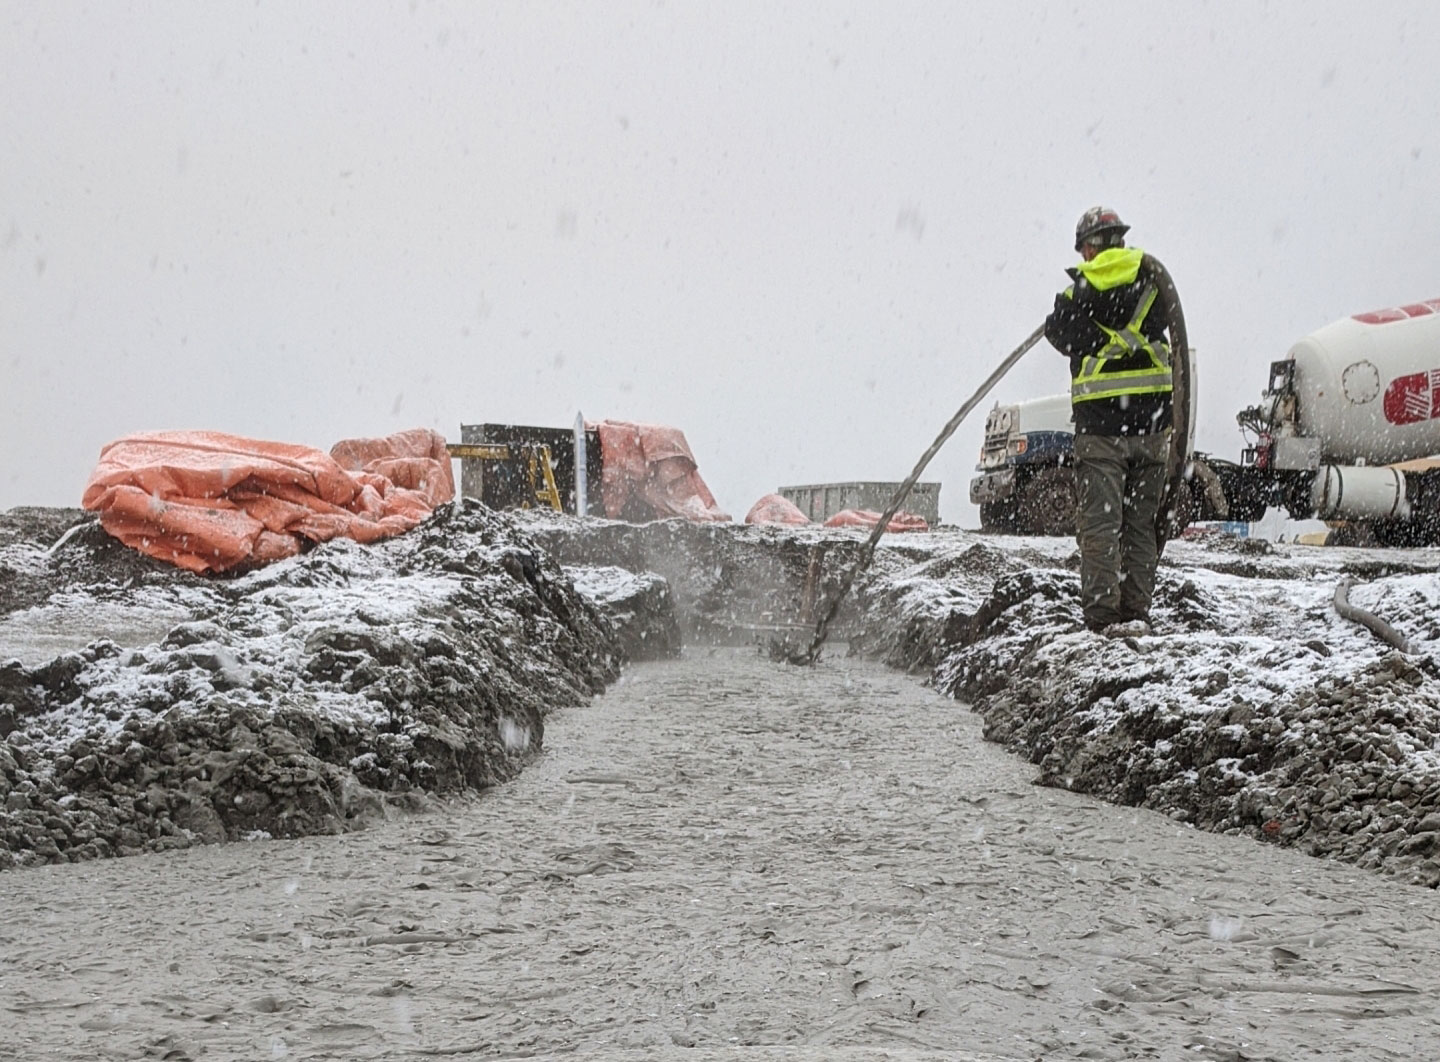 Concrete being poured at the Komatsu Manufacturing Plant in winter